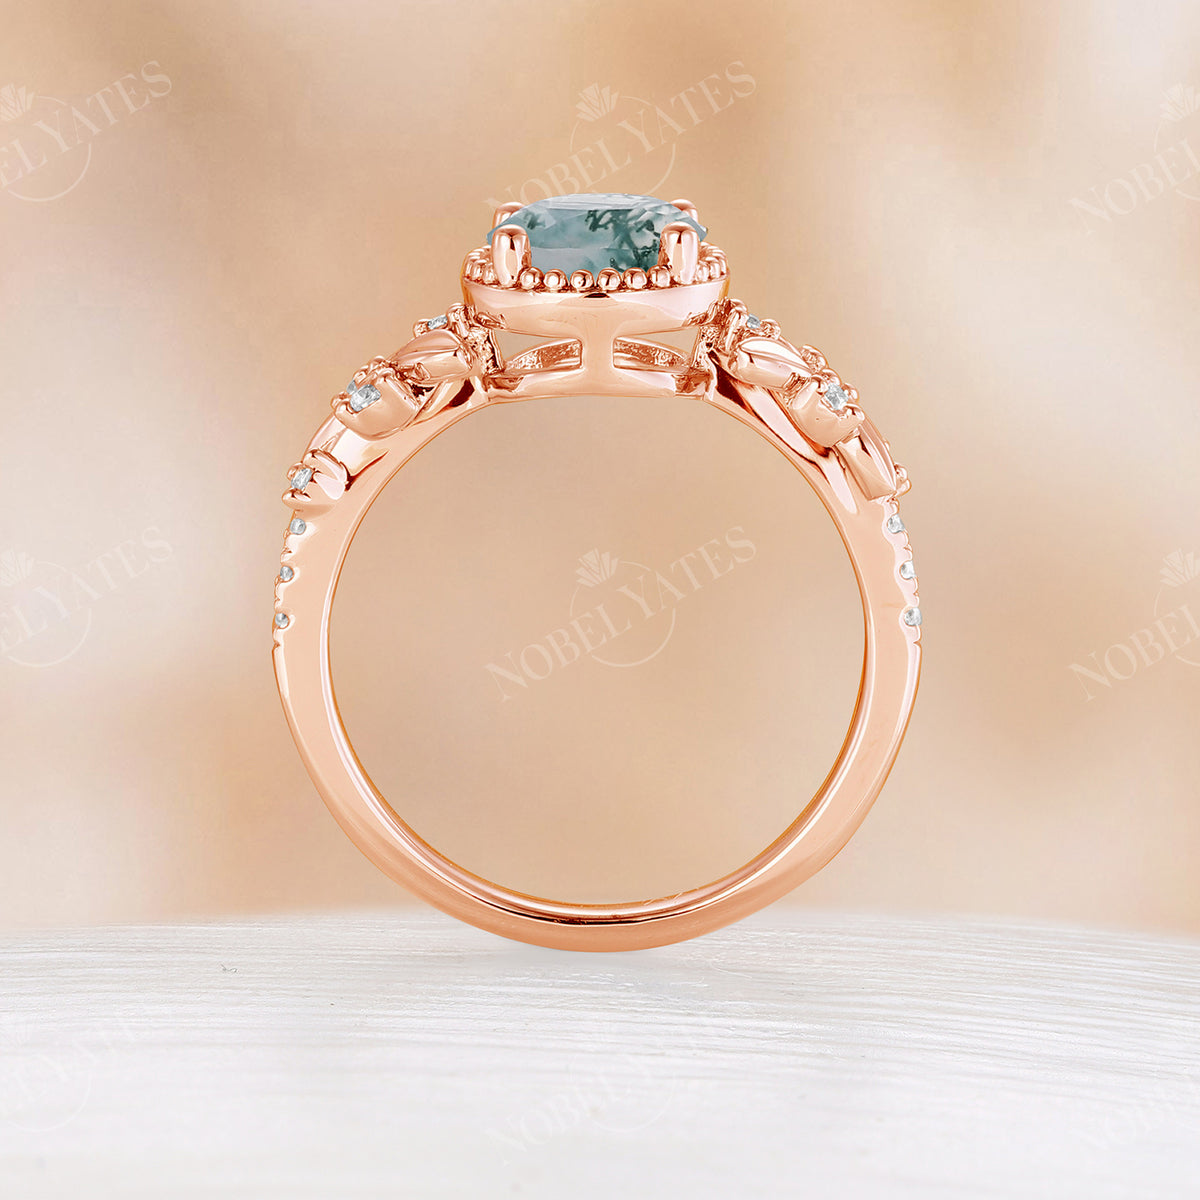 Round Moss Agate Nature Leaf Design Engagement Ring Rose Gold